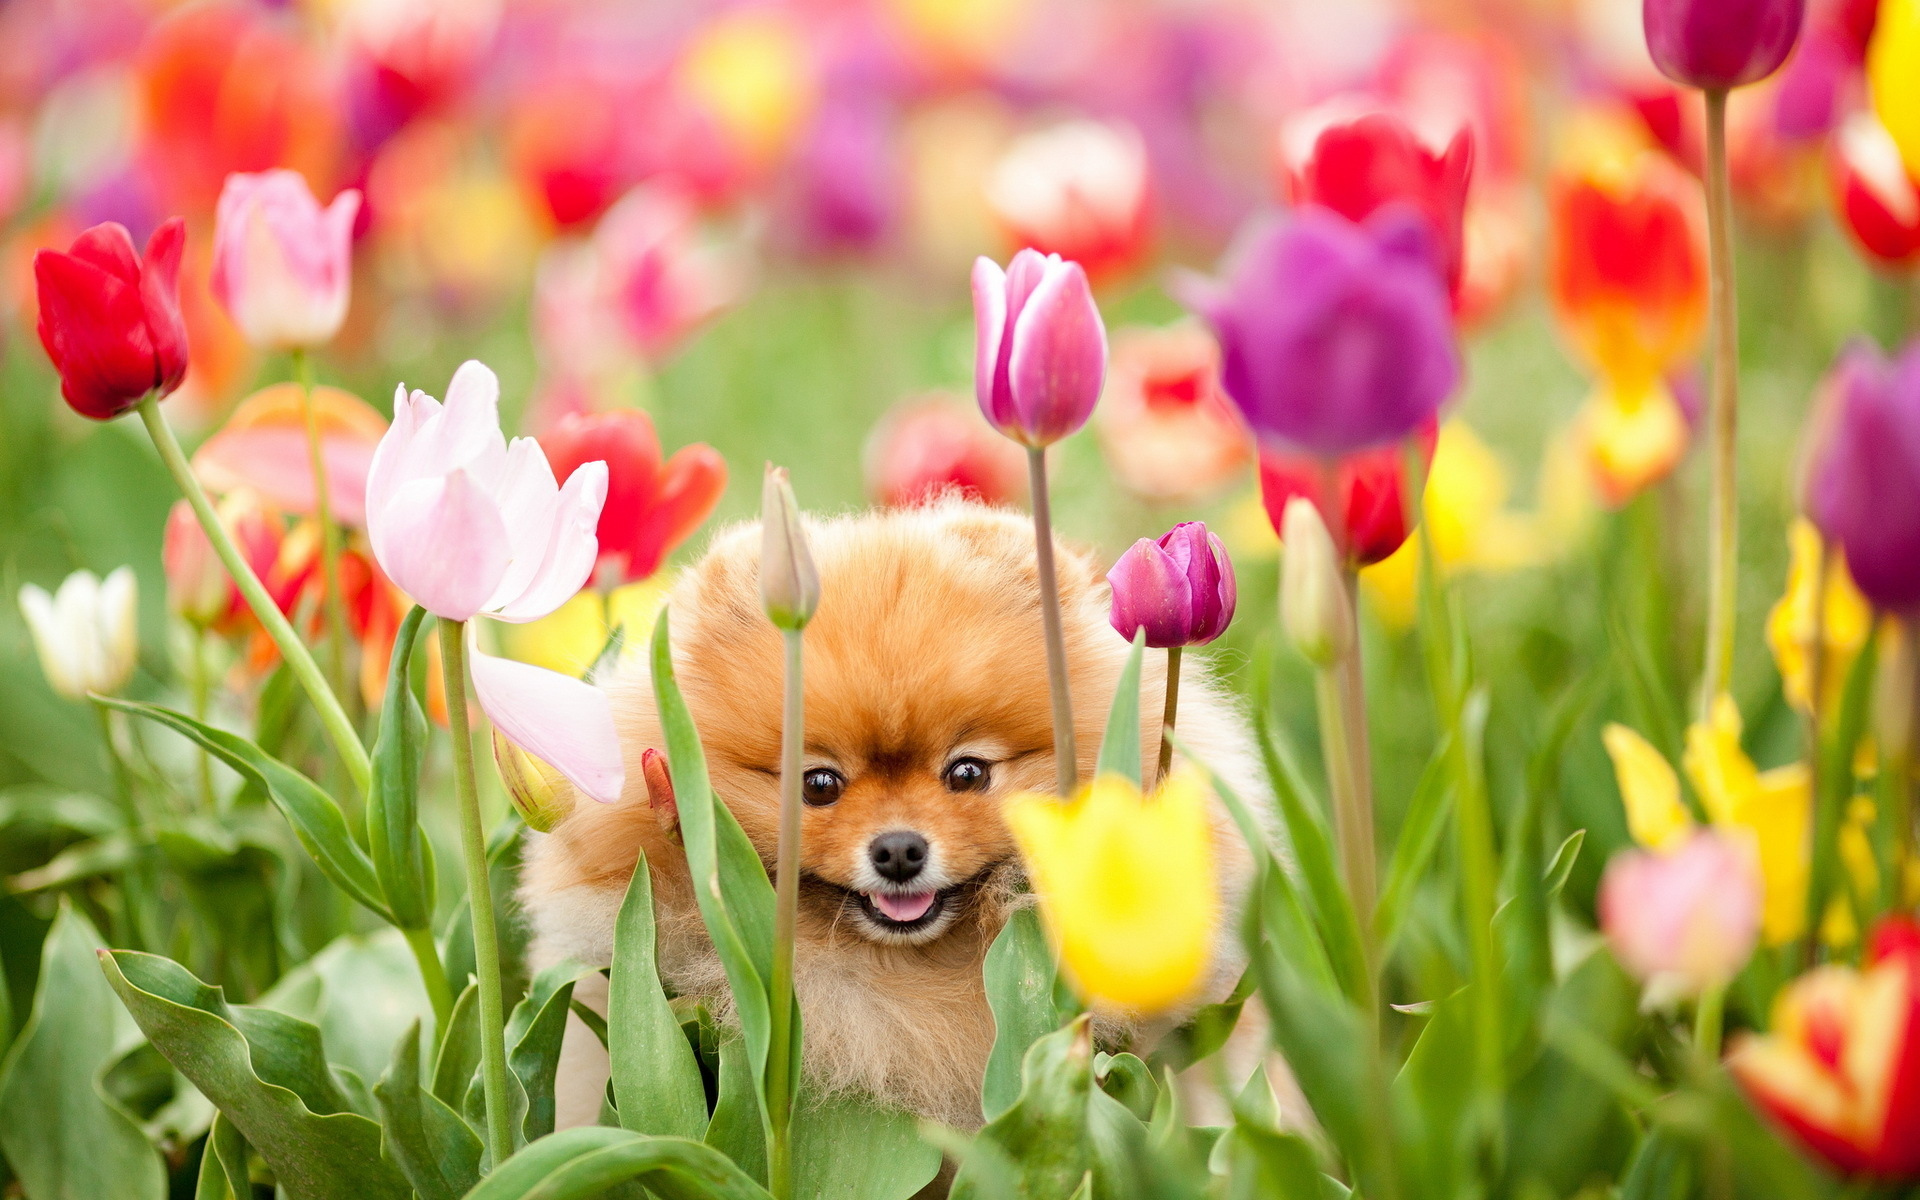 Dog and tulips wallpapers and images   wallpapers pictures photos 1920x1200